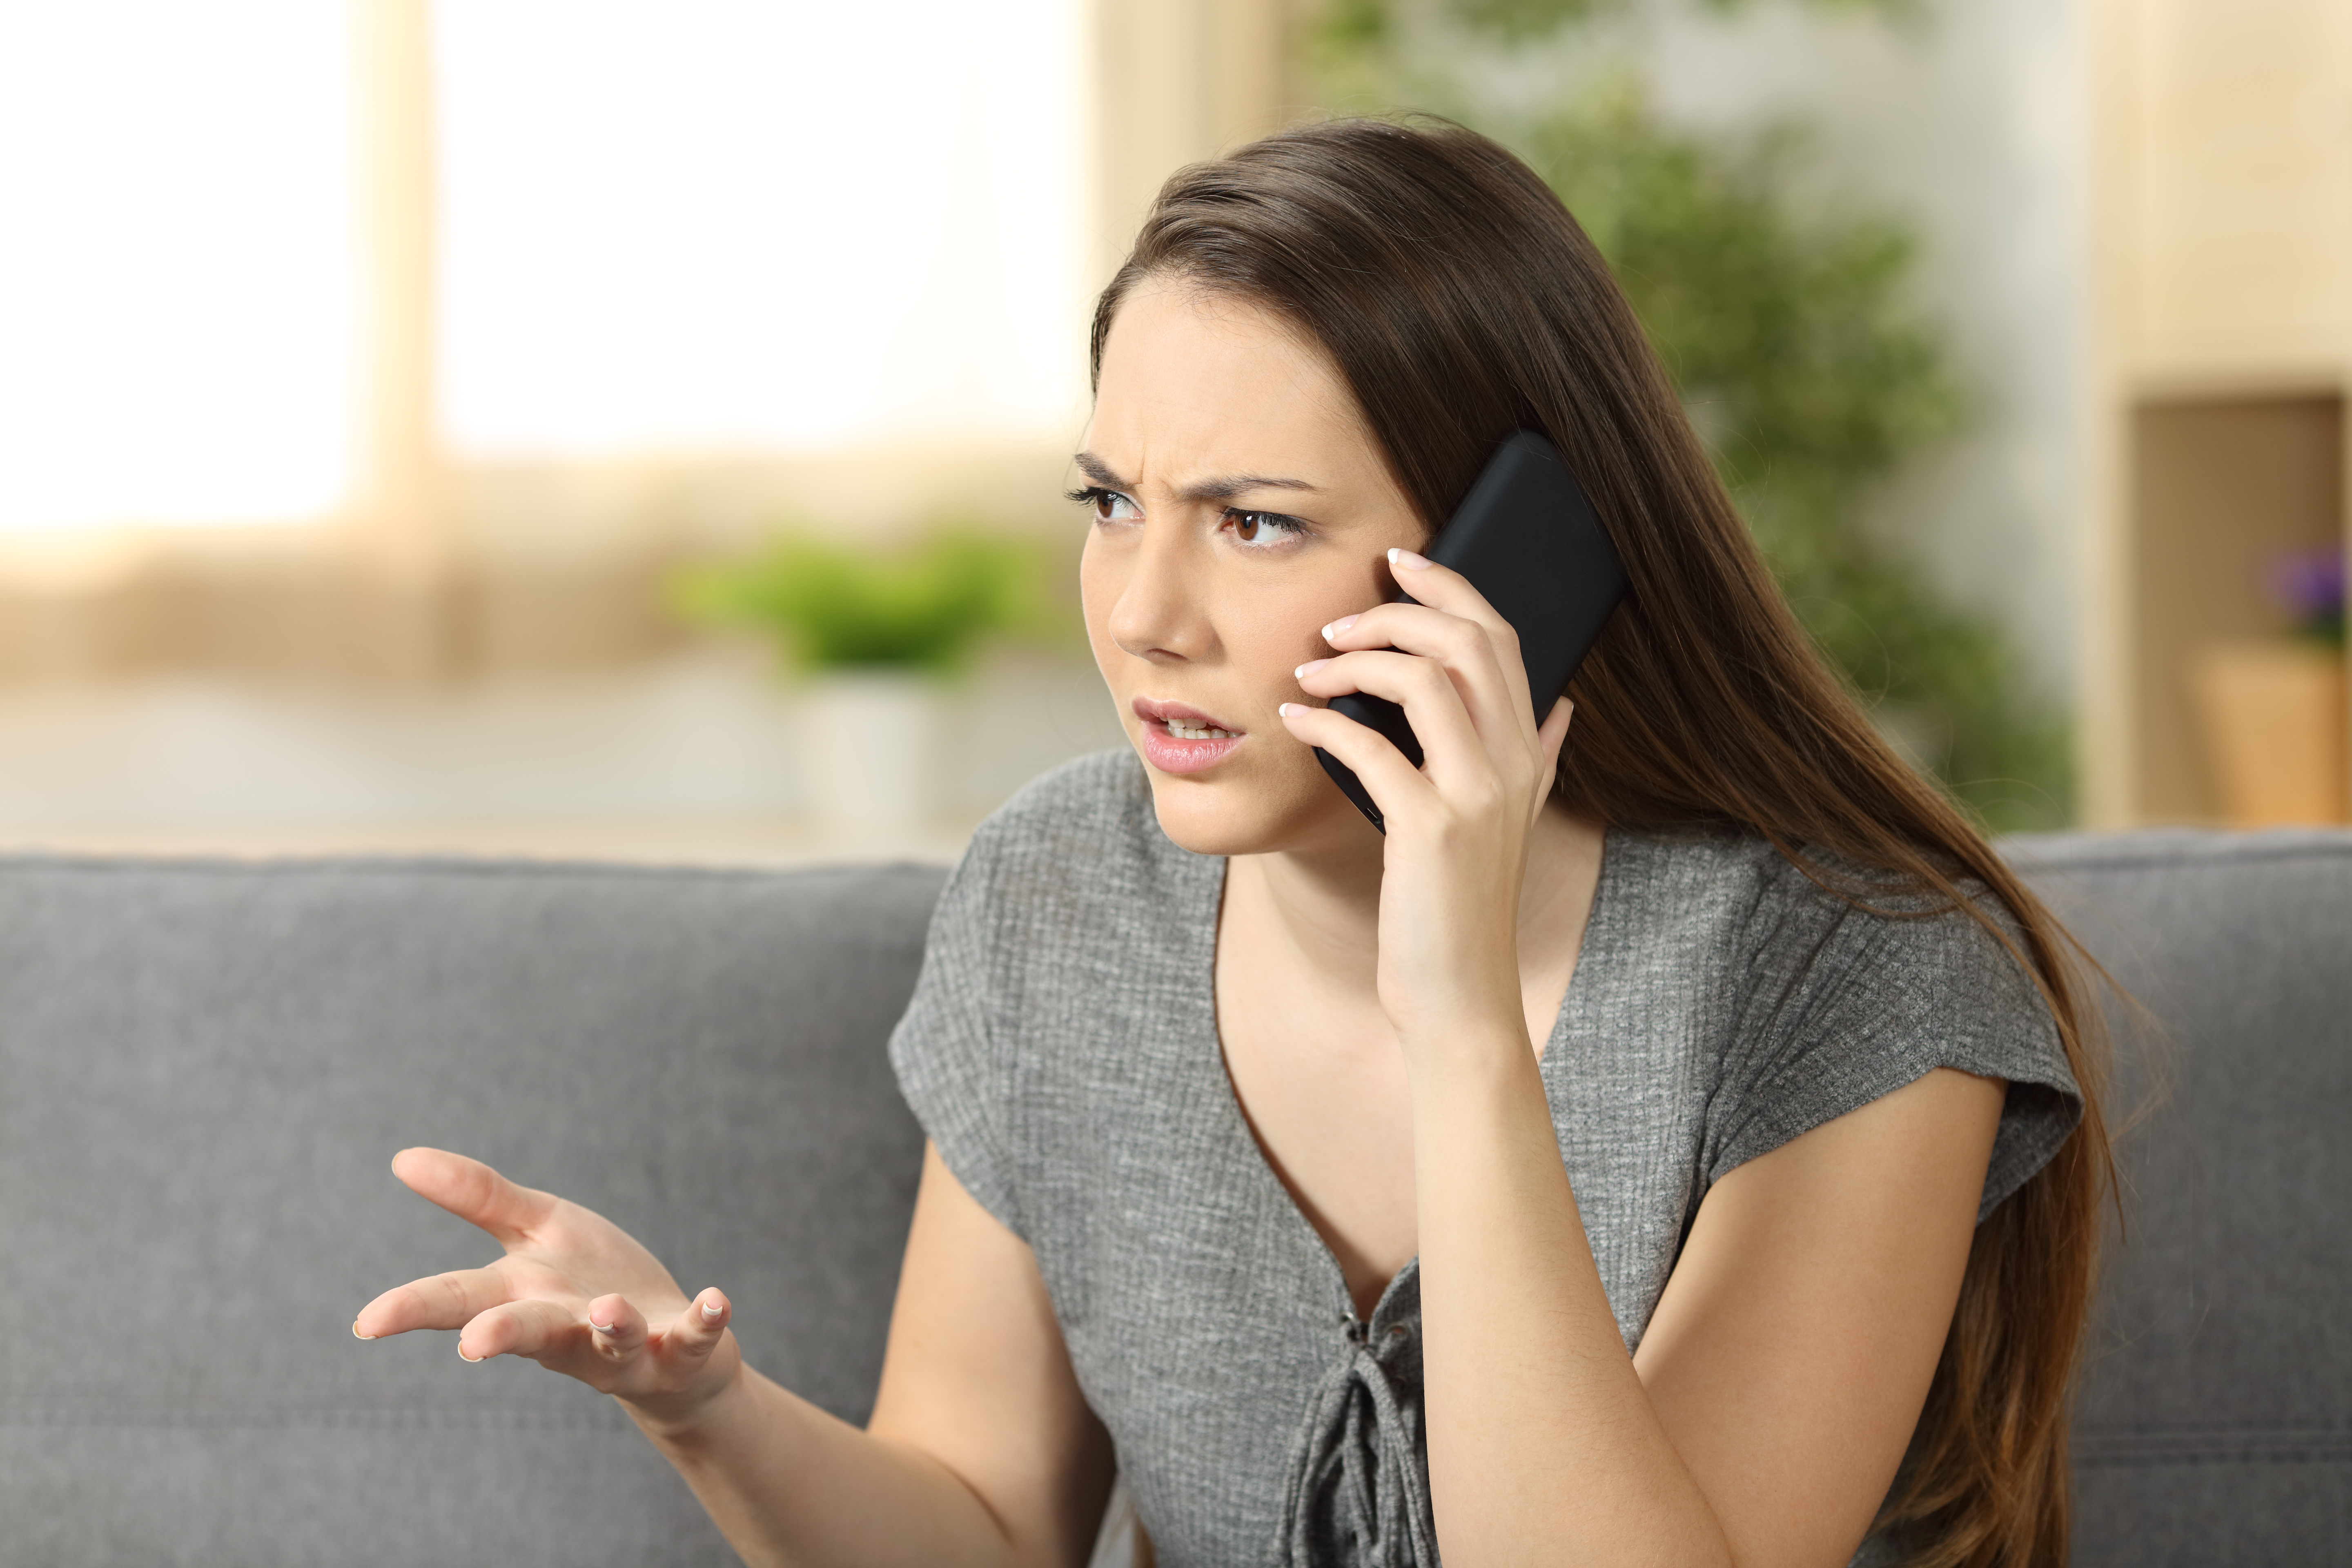 A woman arguing on a phone call | Source: Shutterstock